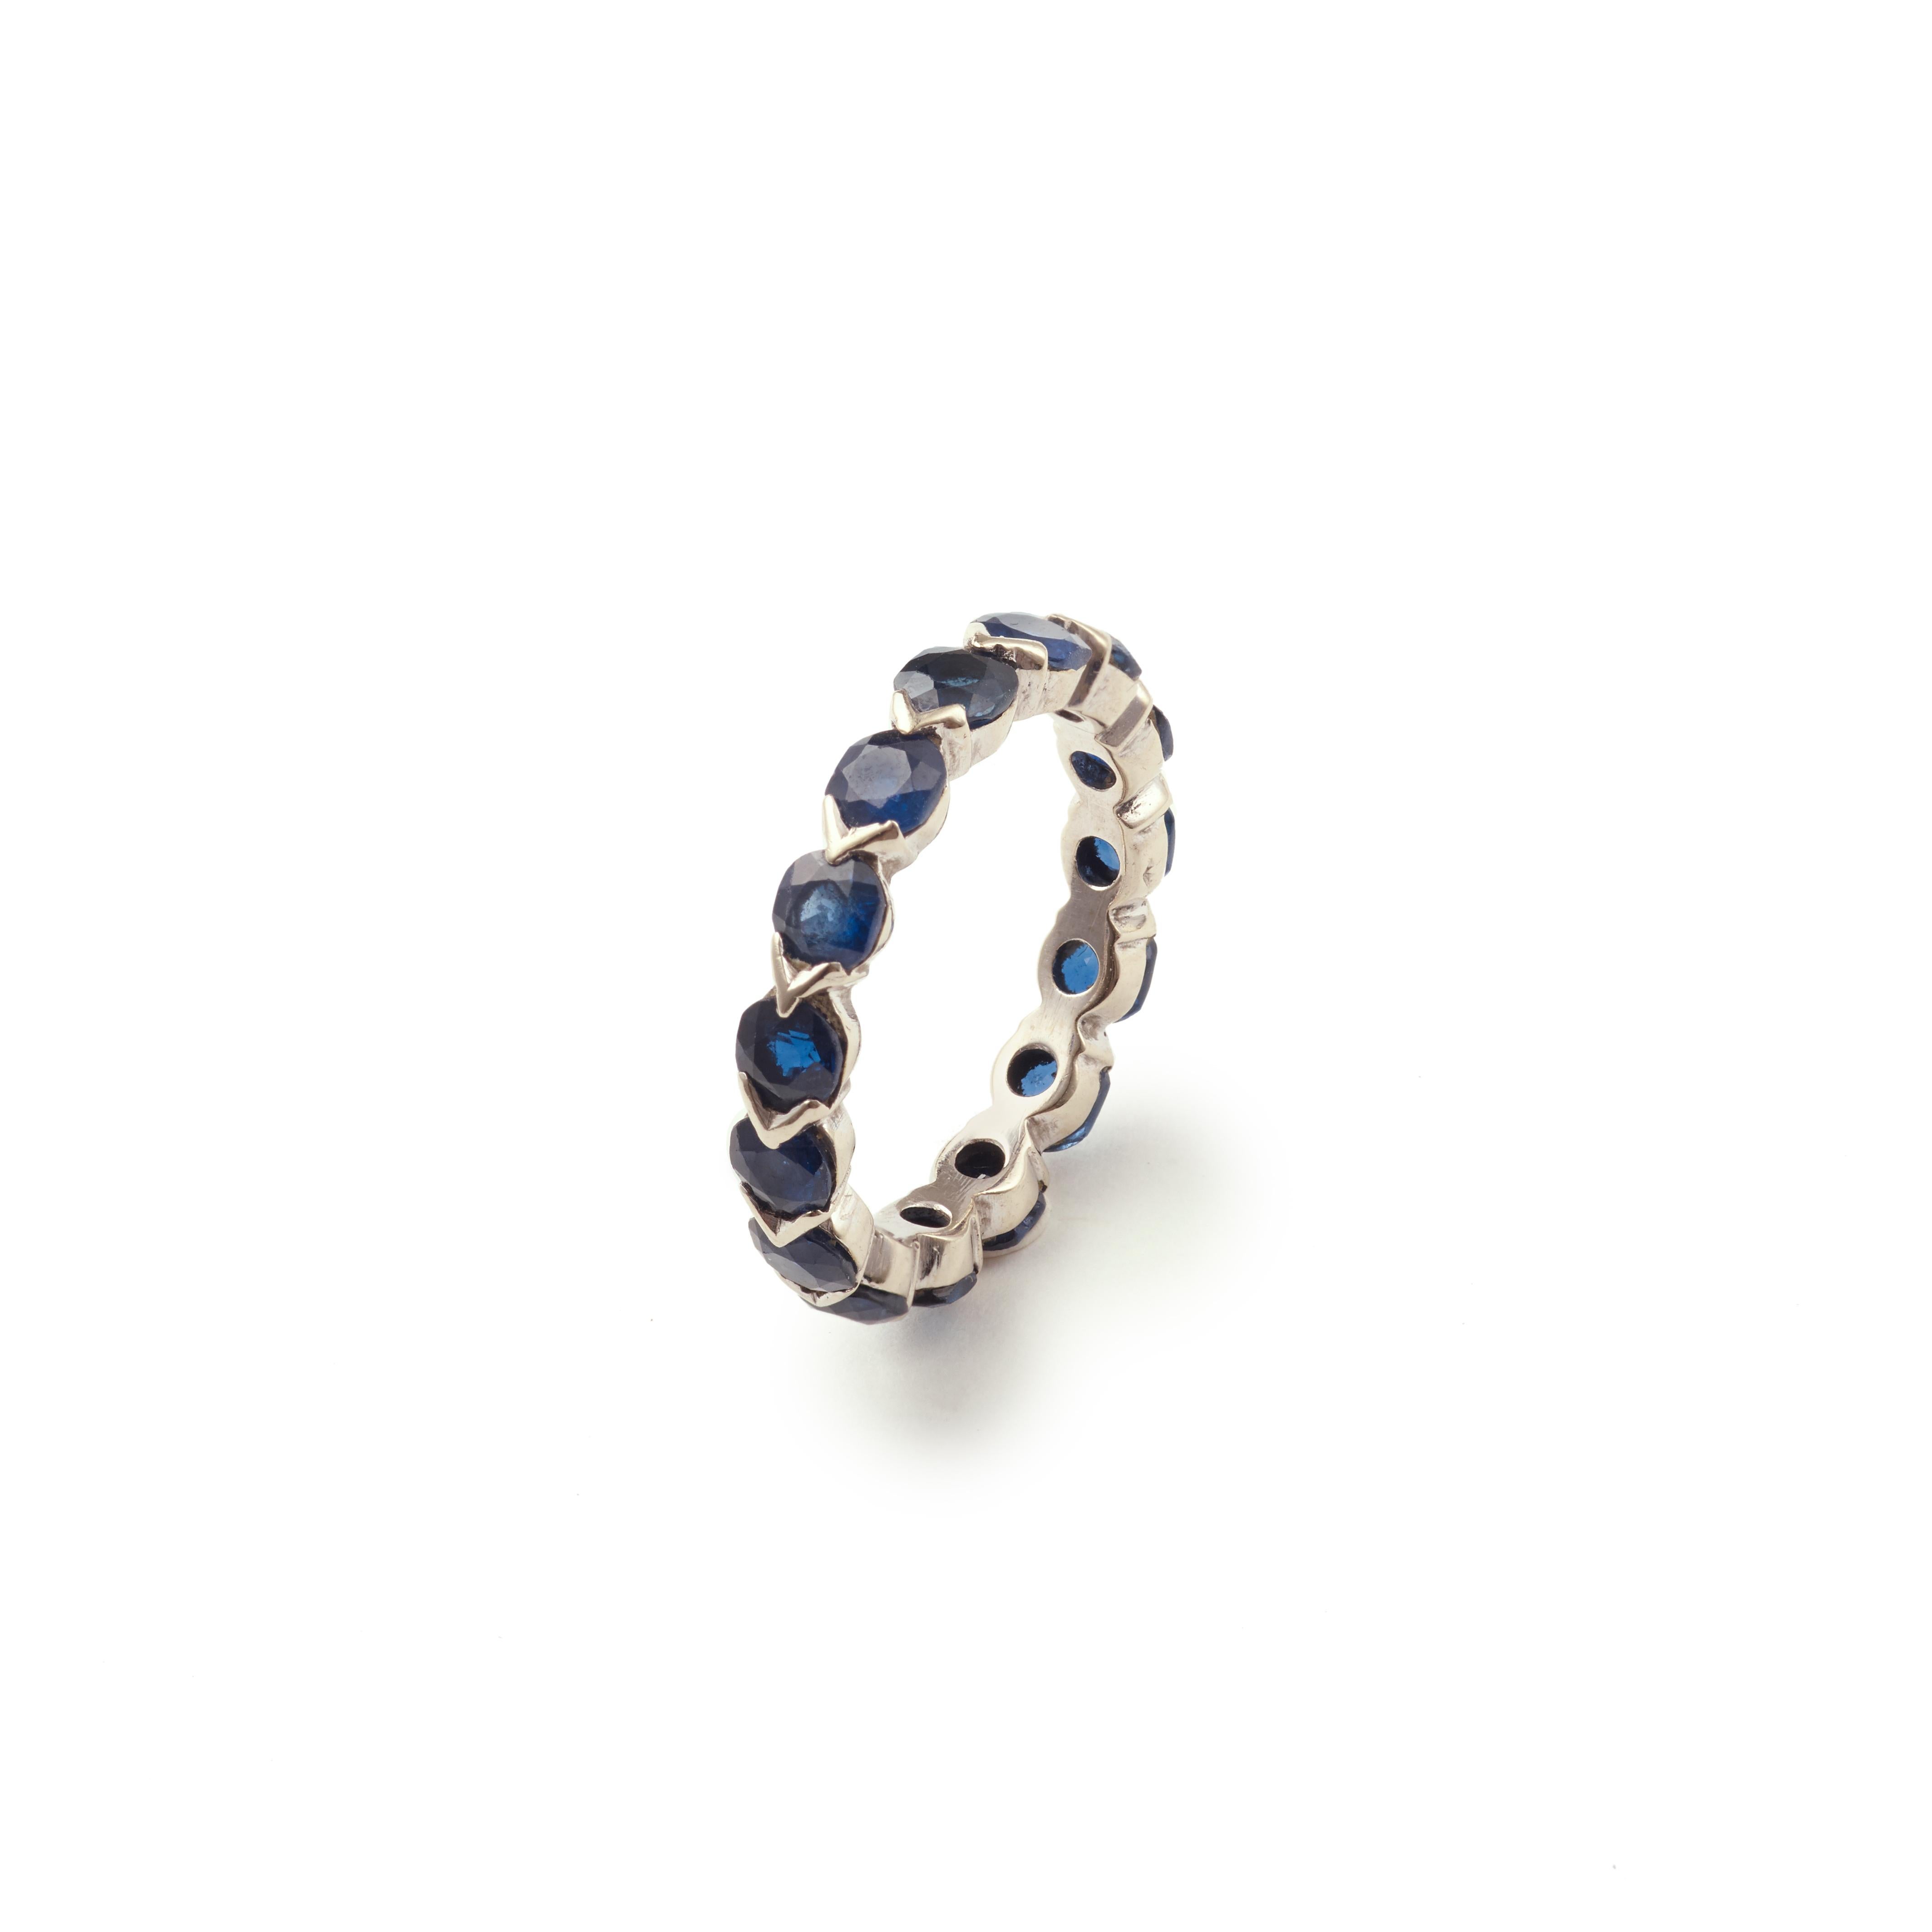 American wedding band in white gold set with 15 square cushion cut sapphires.

Total approximate weight of sapphires: 2.50-2.80 carats

Ring size: 3.40 x 21.32 x 2.58 mm ( 0.118 x 0.827 x 0.079 inches)

Finger size: 51 (US size: 5.75)

18 carats